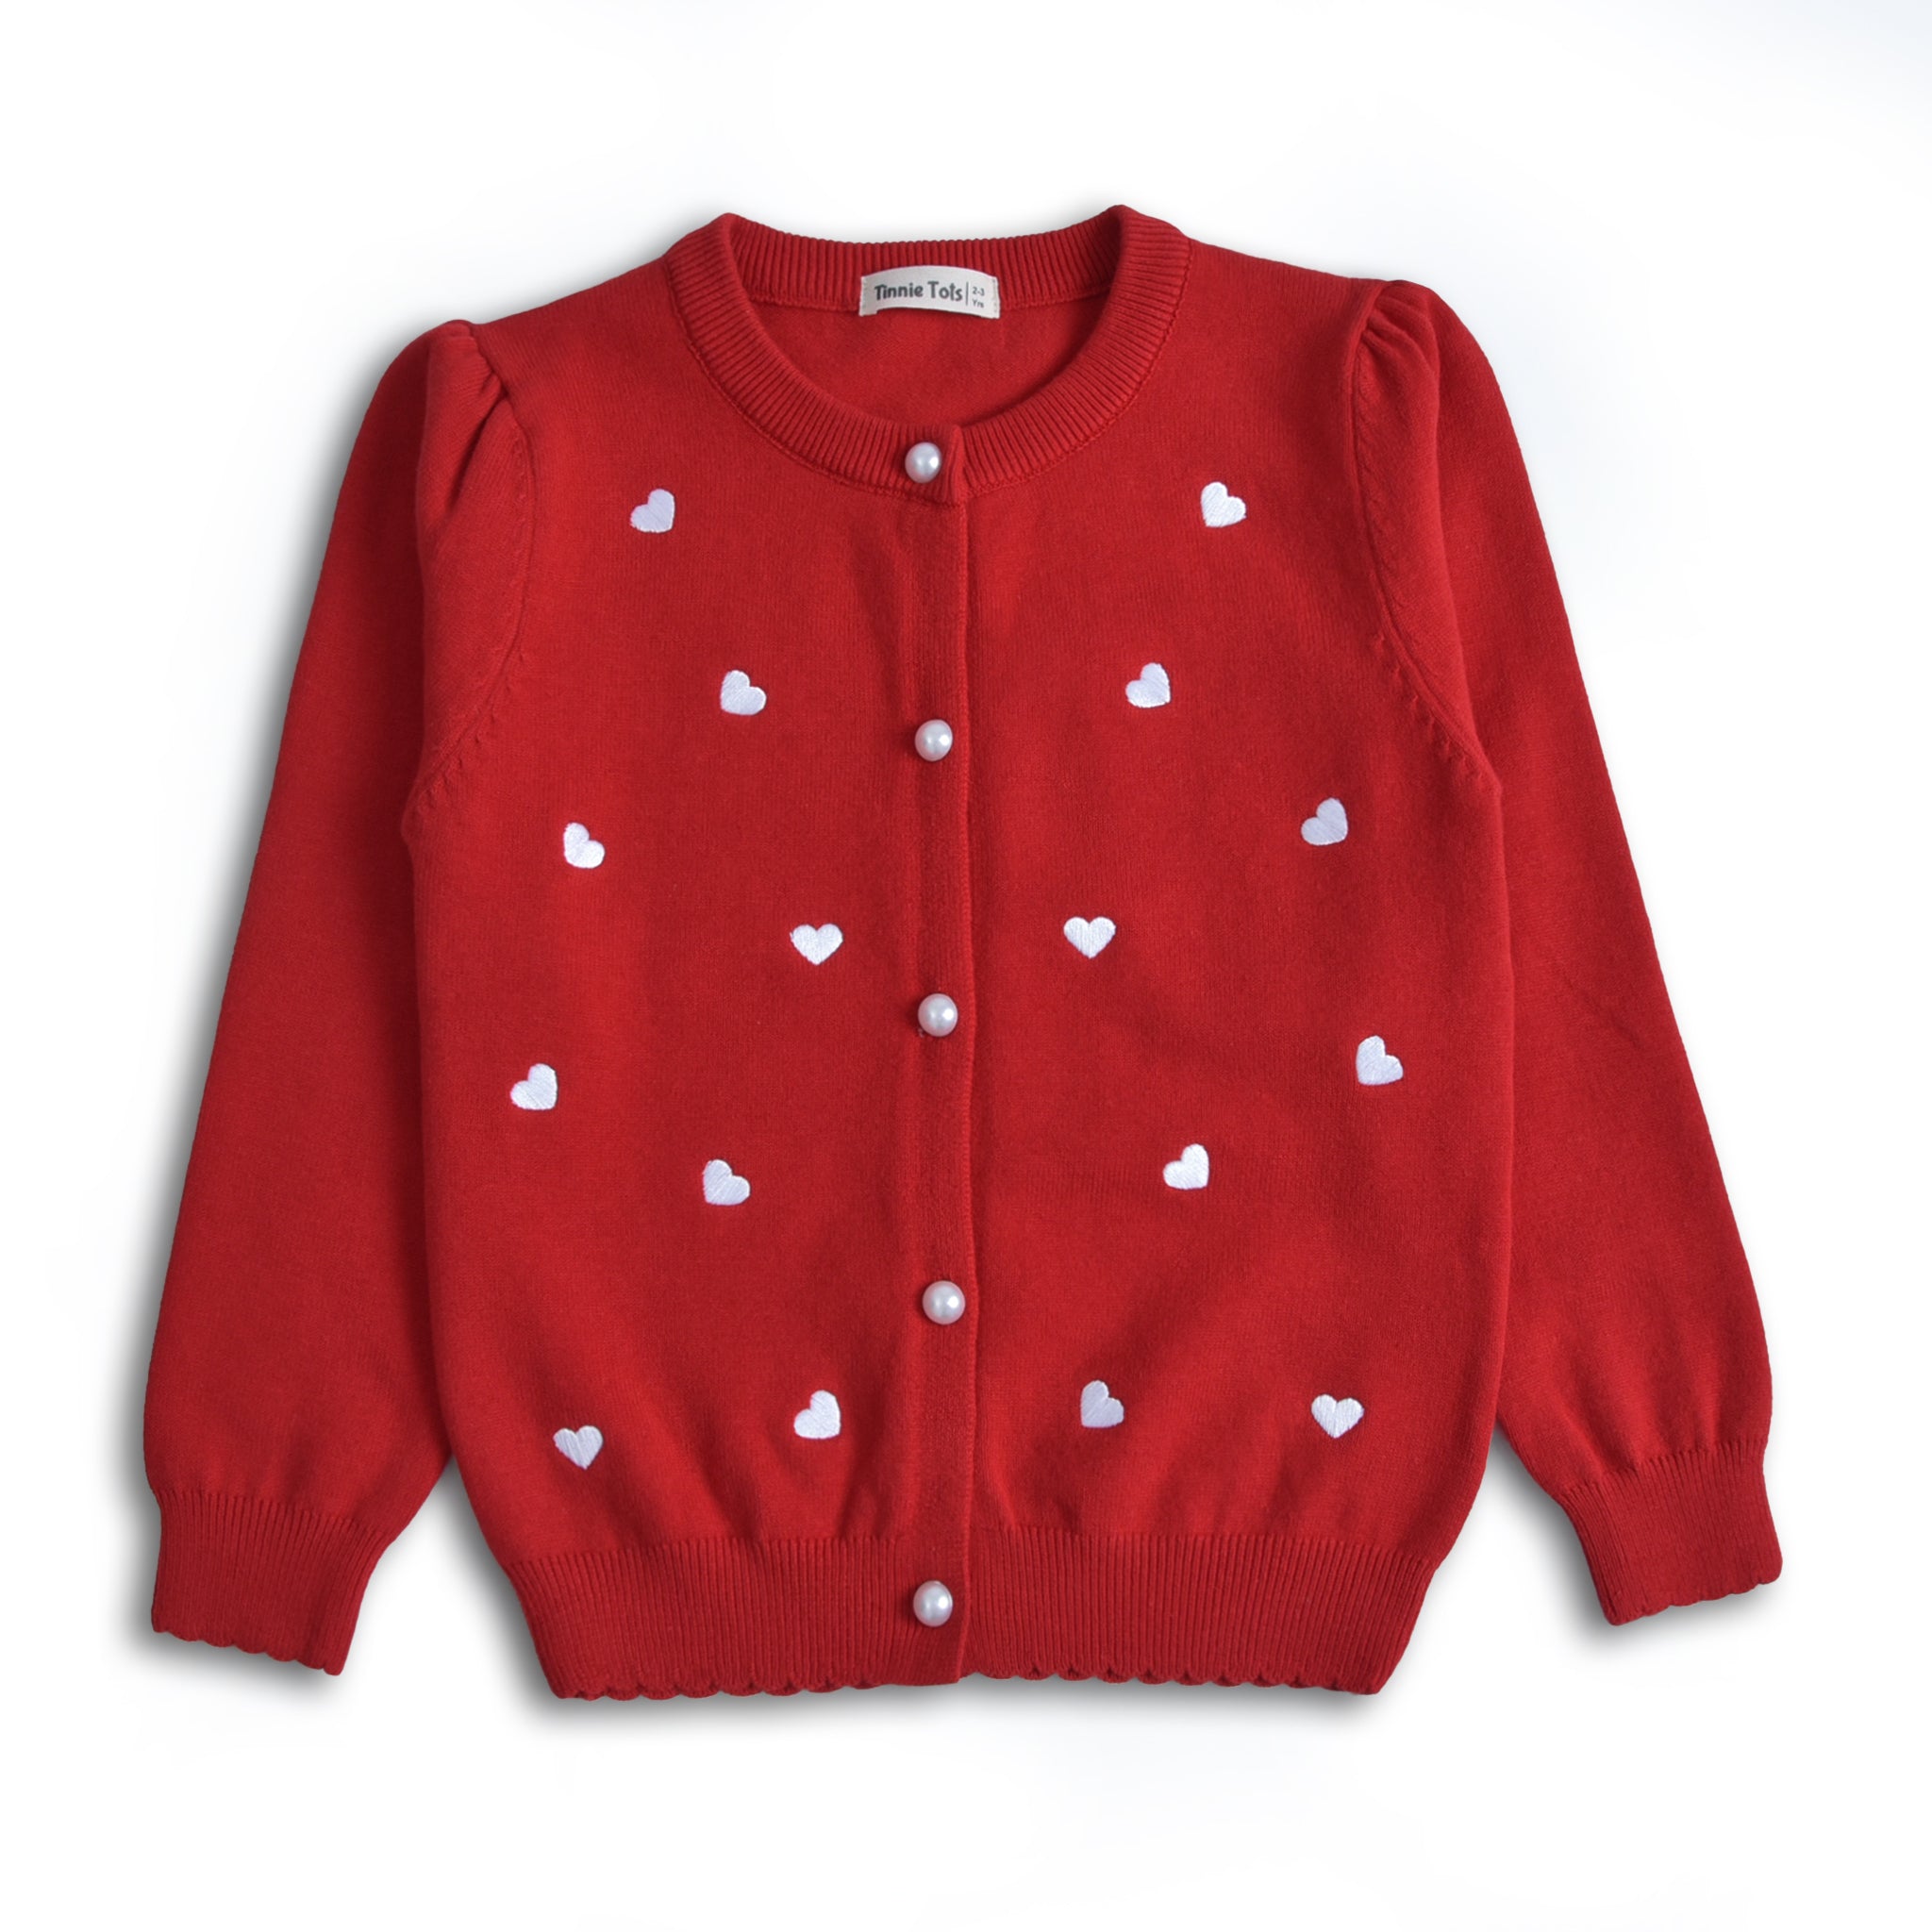 Blood Red Embroidered Cardigan